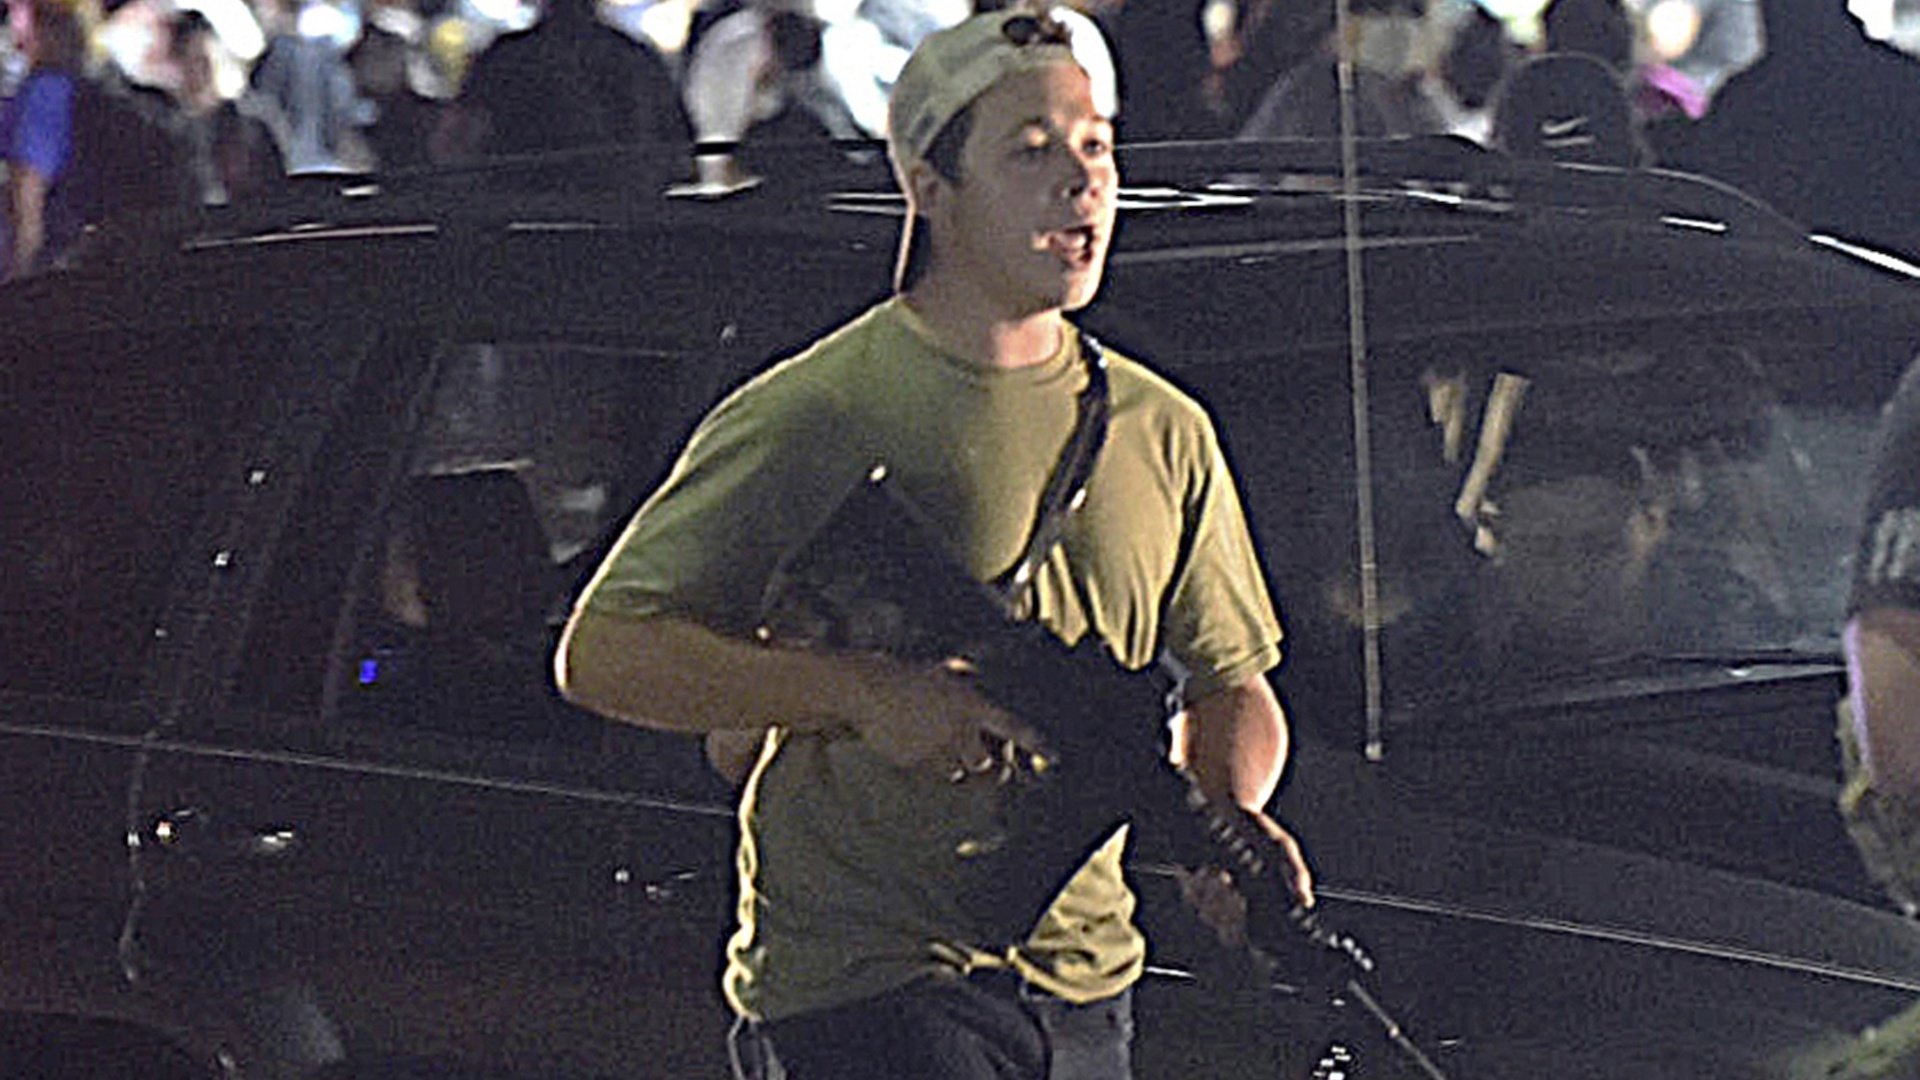 In this Tuesday, Aug. 25, 2020 file photo, Kyle Rittenhouse carries a weapon as he walks along Sheridan Road in Kenosha, Wis., during a night of unrest following the weekend police shooting of Jacob Blake. (Adam Rogan/The Journal Times via AP, File)